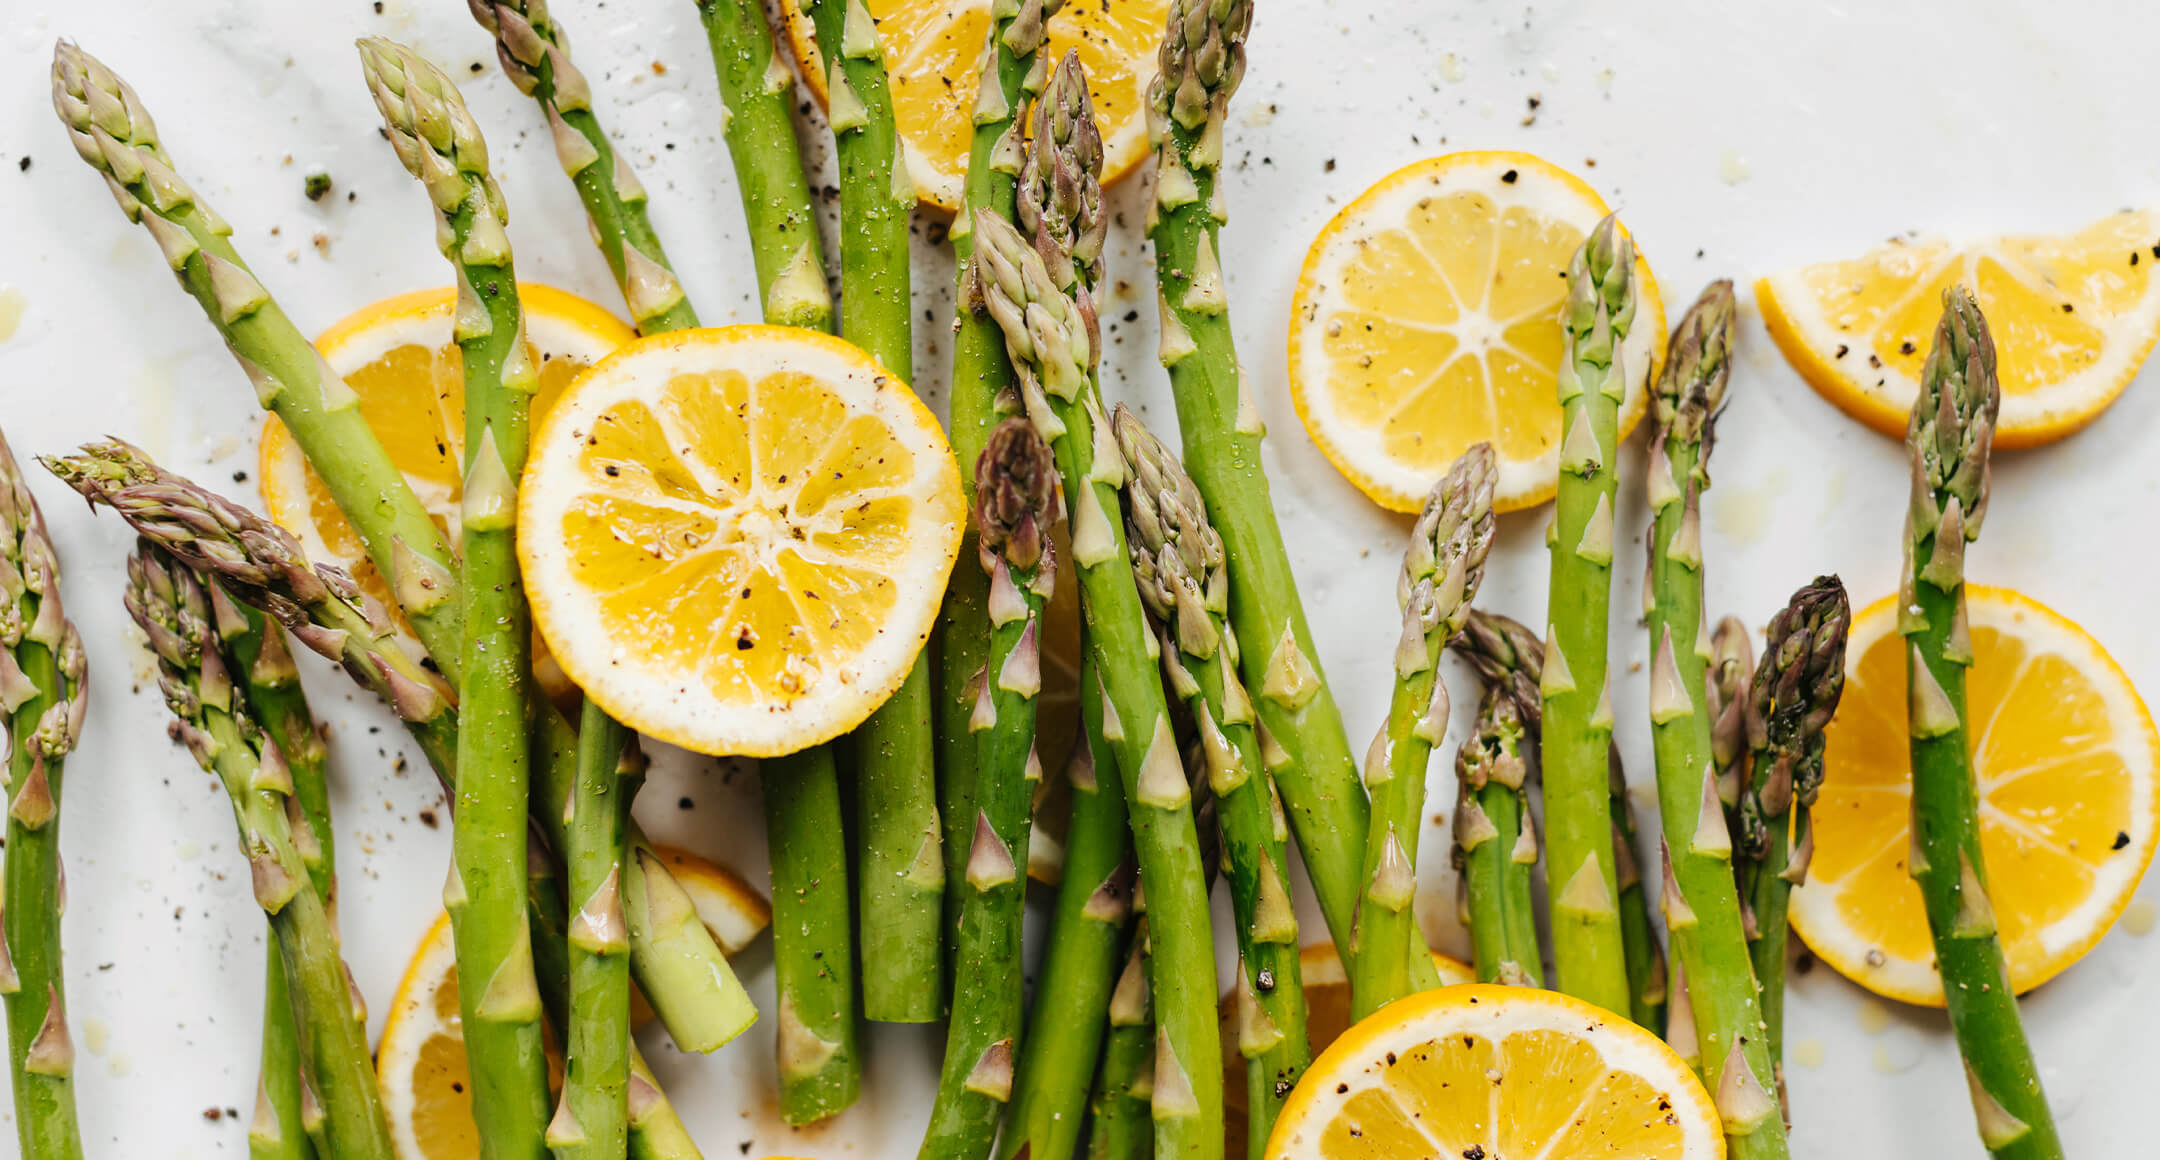 Asparagus spears laid out on a surface with lemon slices arranged throughout.